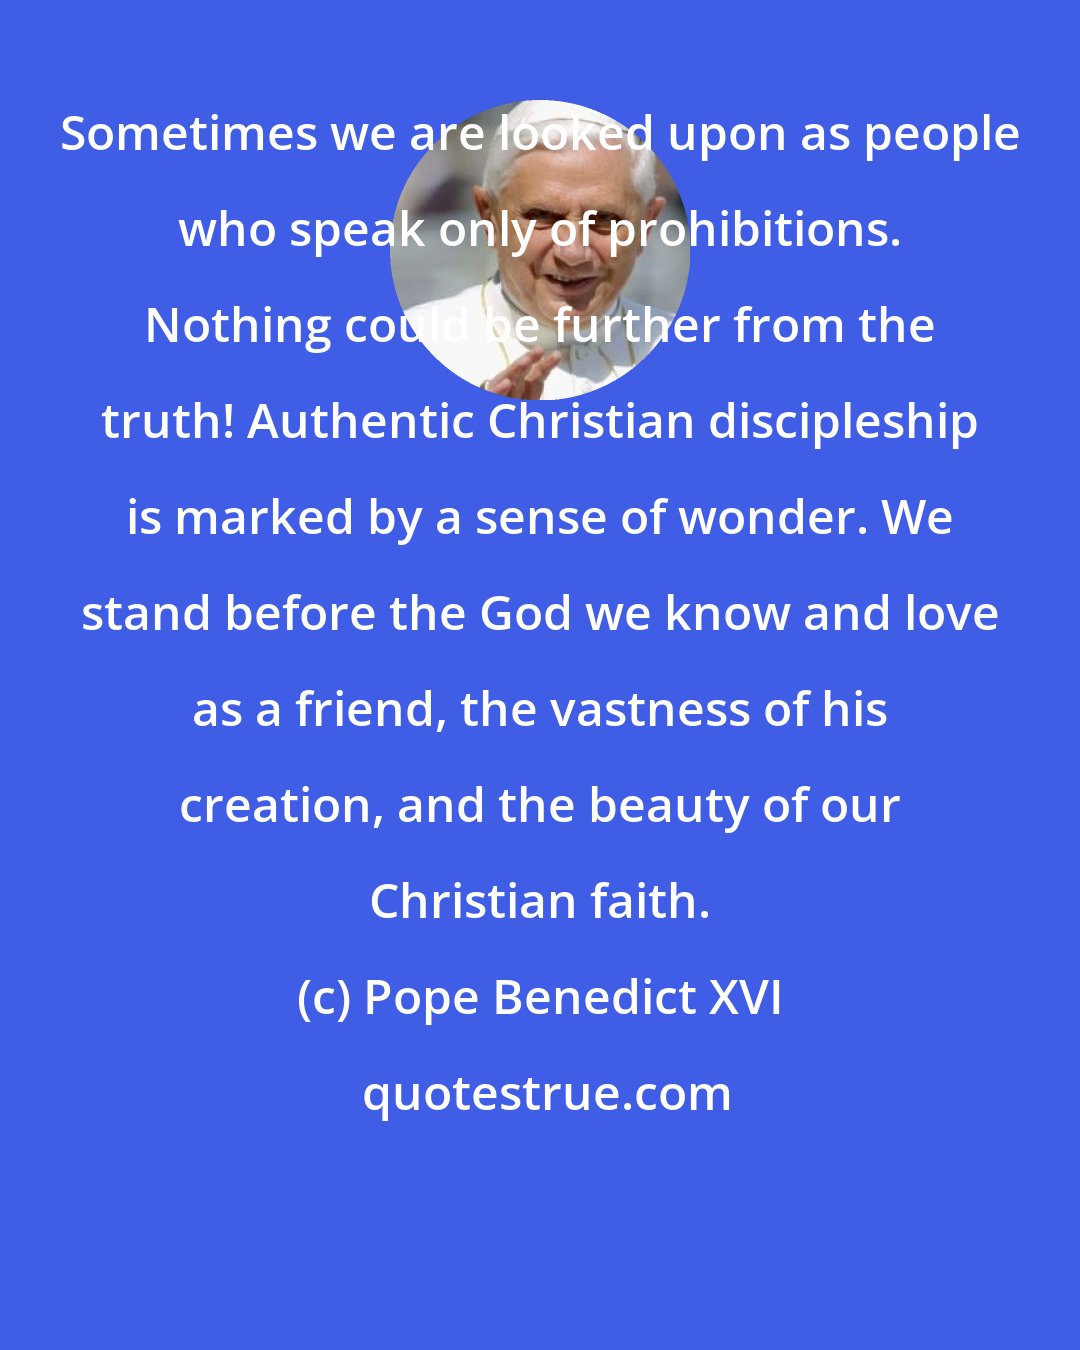 Pope Benedict XVI: Sometimes we are looked upon as people who speak only of prohibitions. Nothing could be further from the truth! Authentic Christian discipleship is marked by a sense of wonder. We stand before the God we know and love as a friend, the vastness of his creation, and the beauty of our Christian faith.